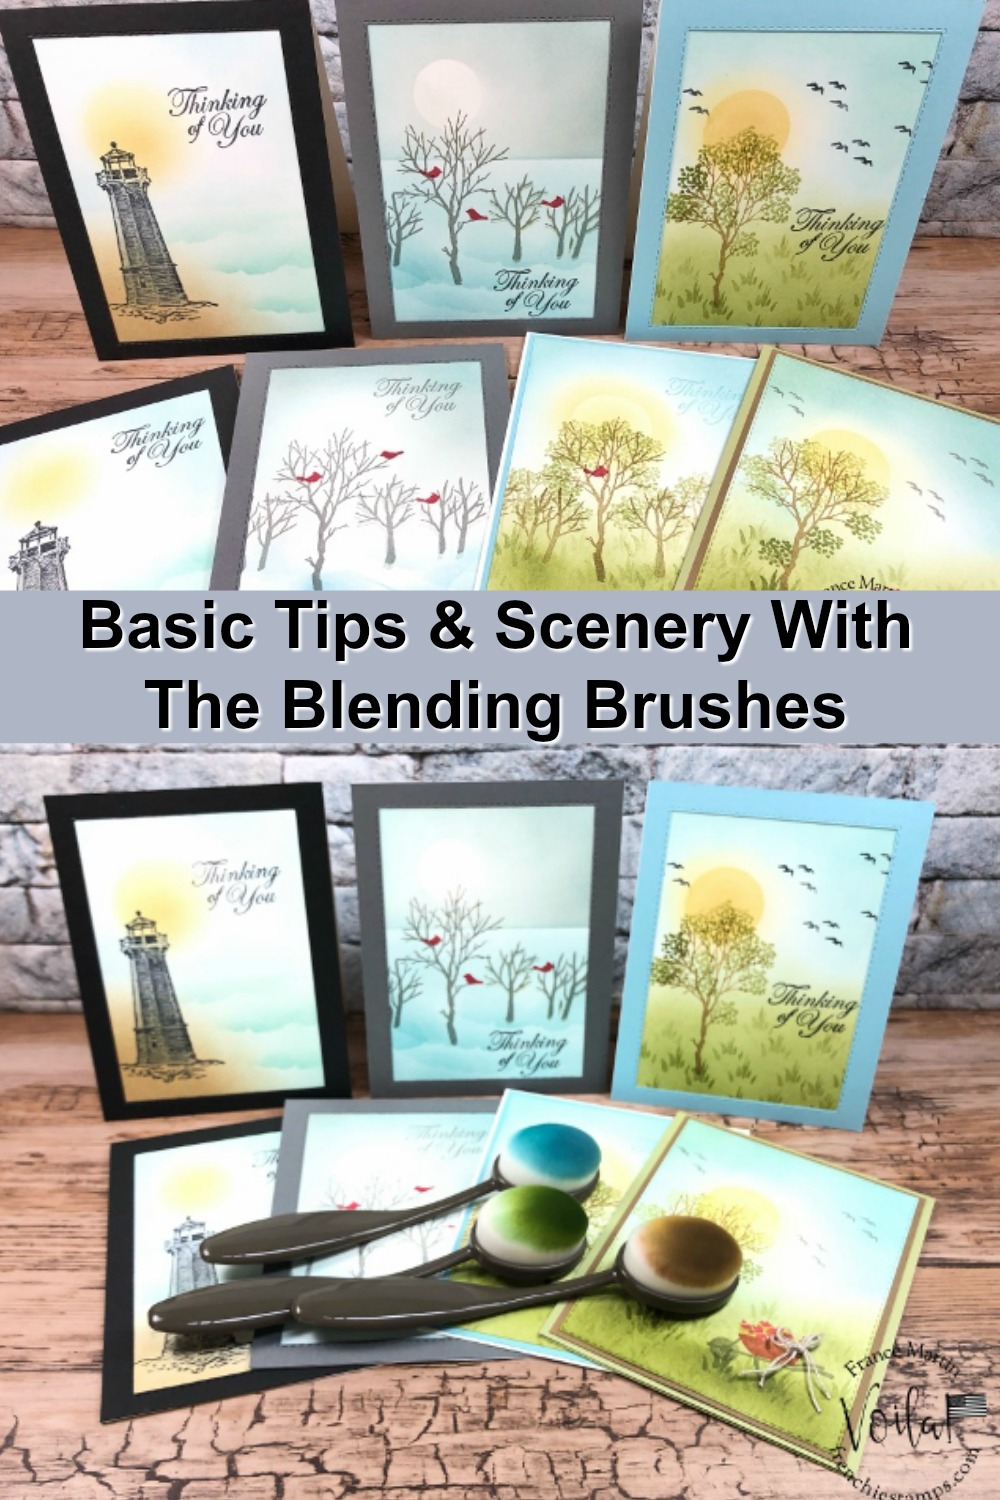 Basic Tips and Scenery with the Blending Brushes.